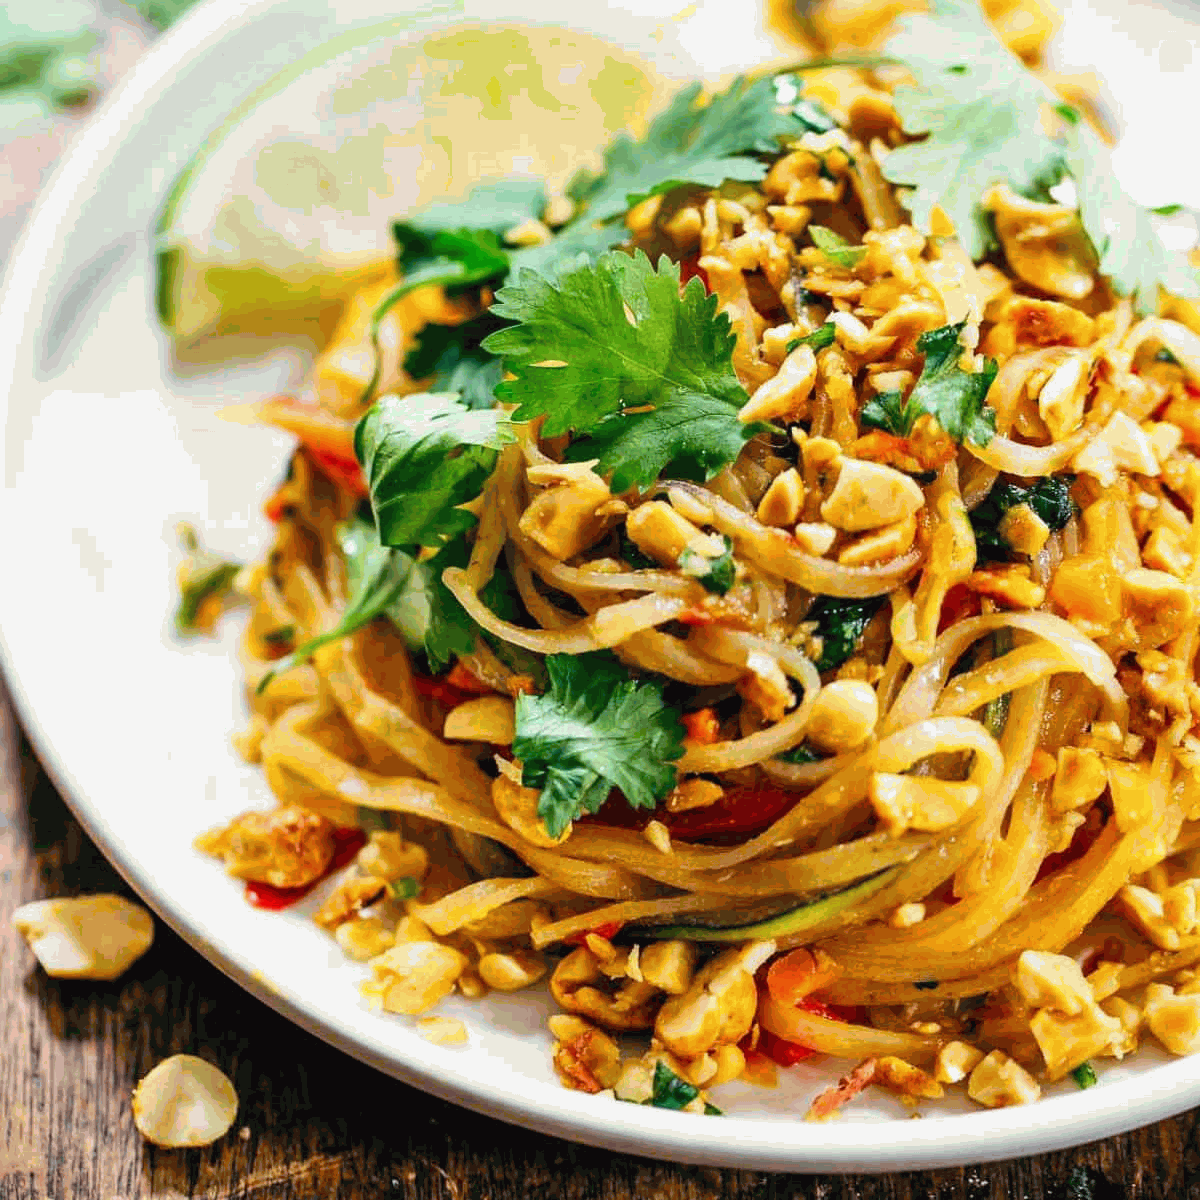 Pad Thai Noodles with Tofu and Vegetables